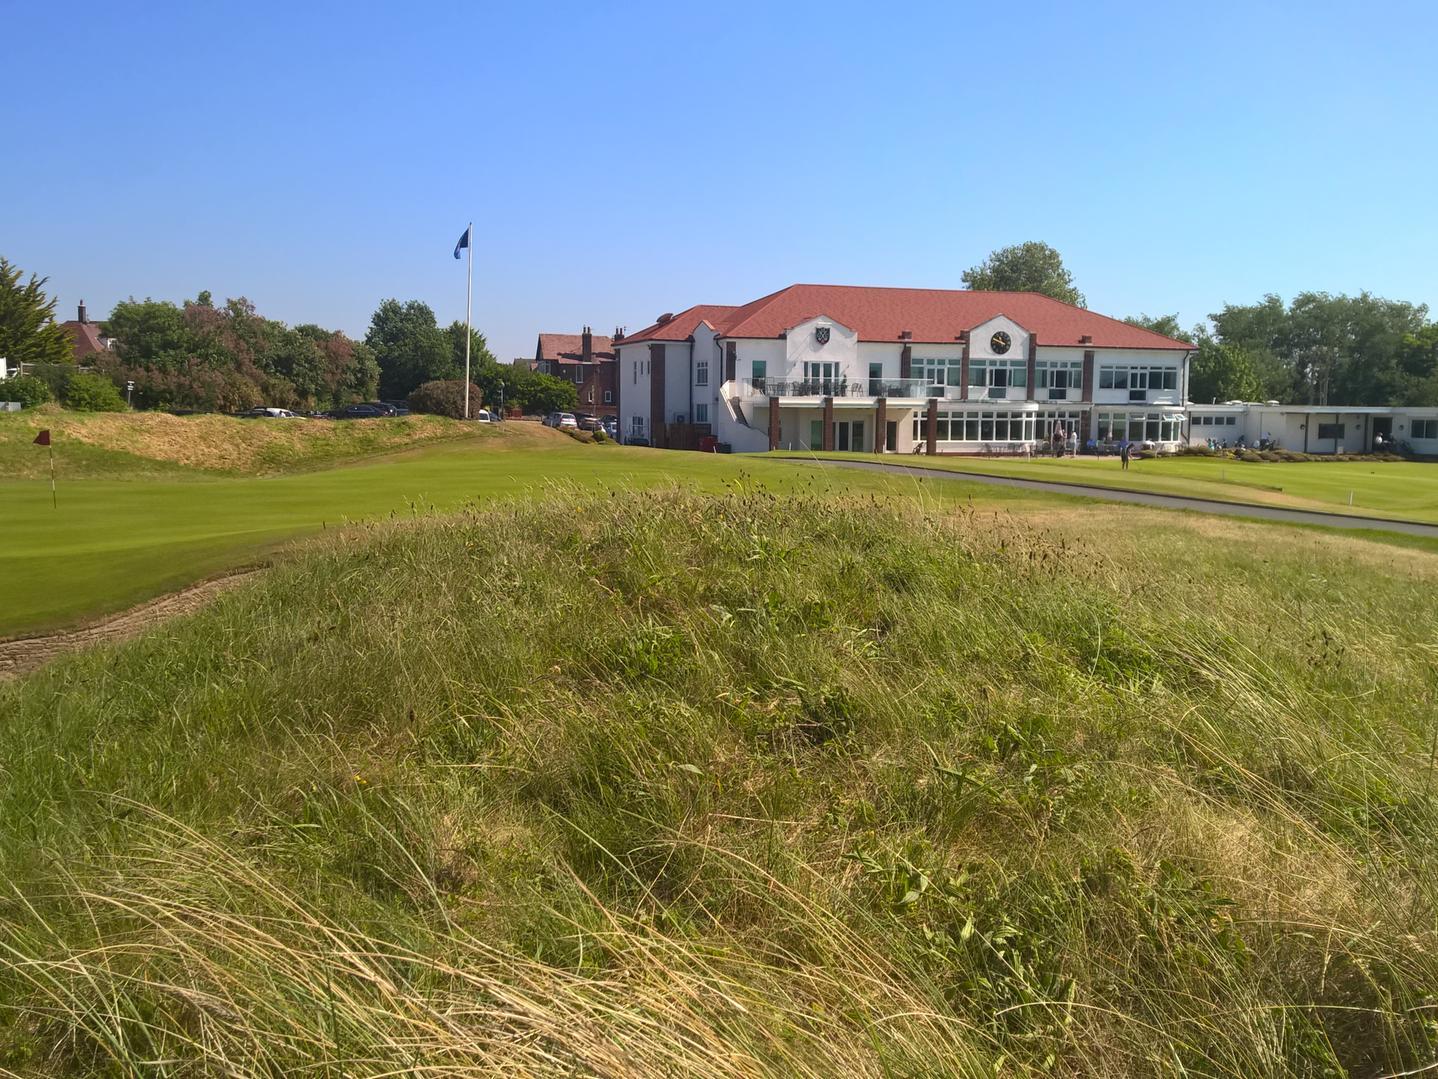 Hillside Golf Club, Hastings Road, Hillside, Southport
Hillside Golf Club is situated in Southport, the home of 'Englands Golf Coast' which boasts Englands finest stretch of coastal links. Hillside has hosted many amateur and professional tournaments in its illustrious history and was recently selected by the European Tour to stage the 2019 British Masters.
Visit https://www.hillside-golfclub.co.uk/